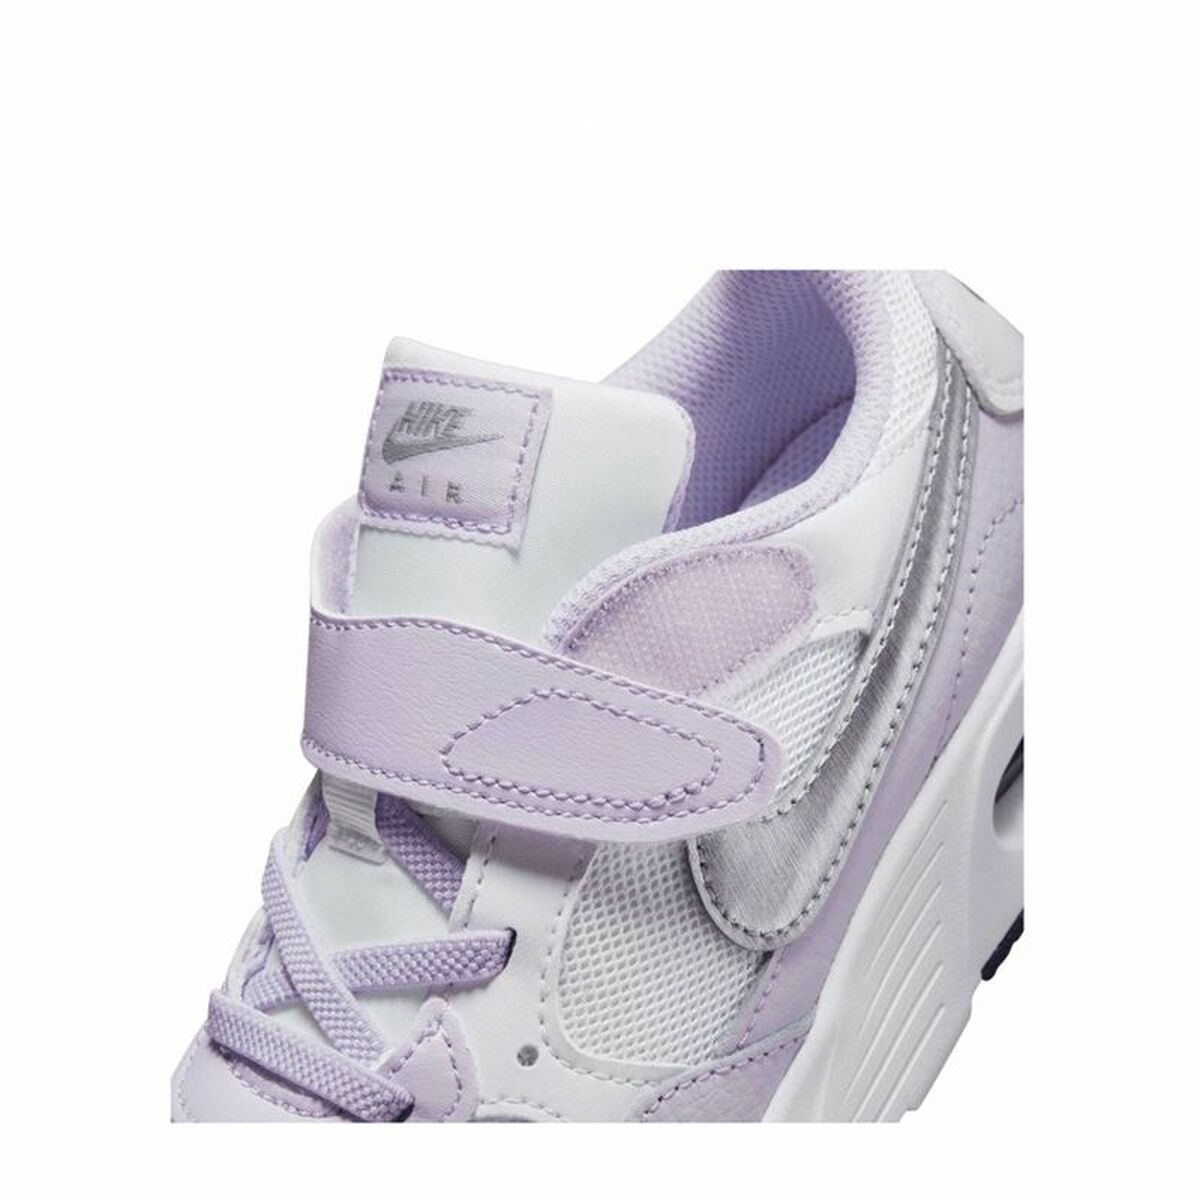 Running Shoes for Kids Nike Air Max SC Lilac White